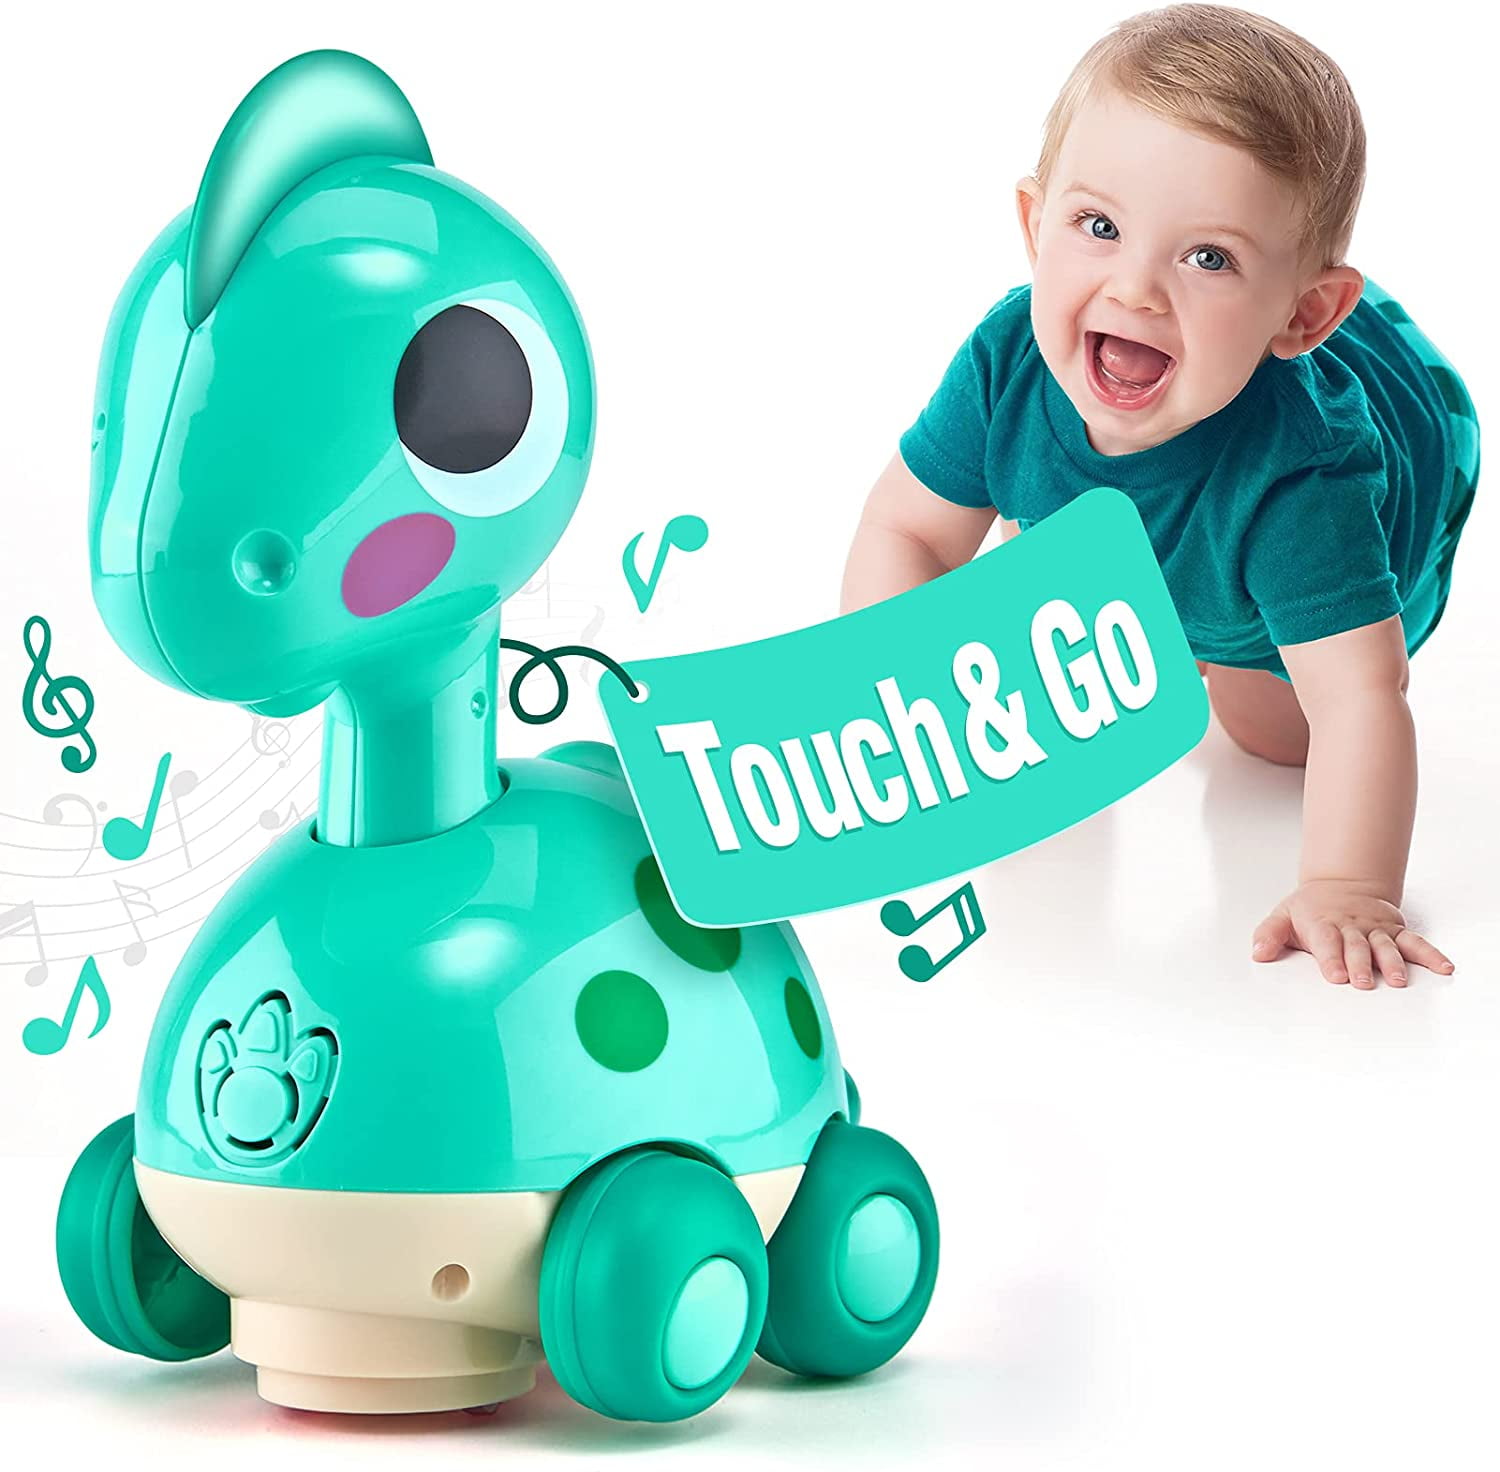 Moontoy Baby Toys 6 To 12 Months Touch And Go Musical Light Infant Toys